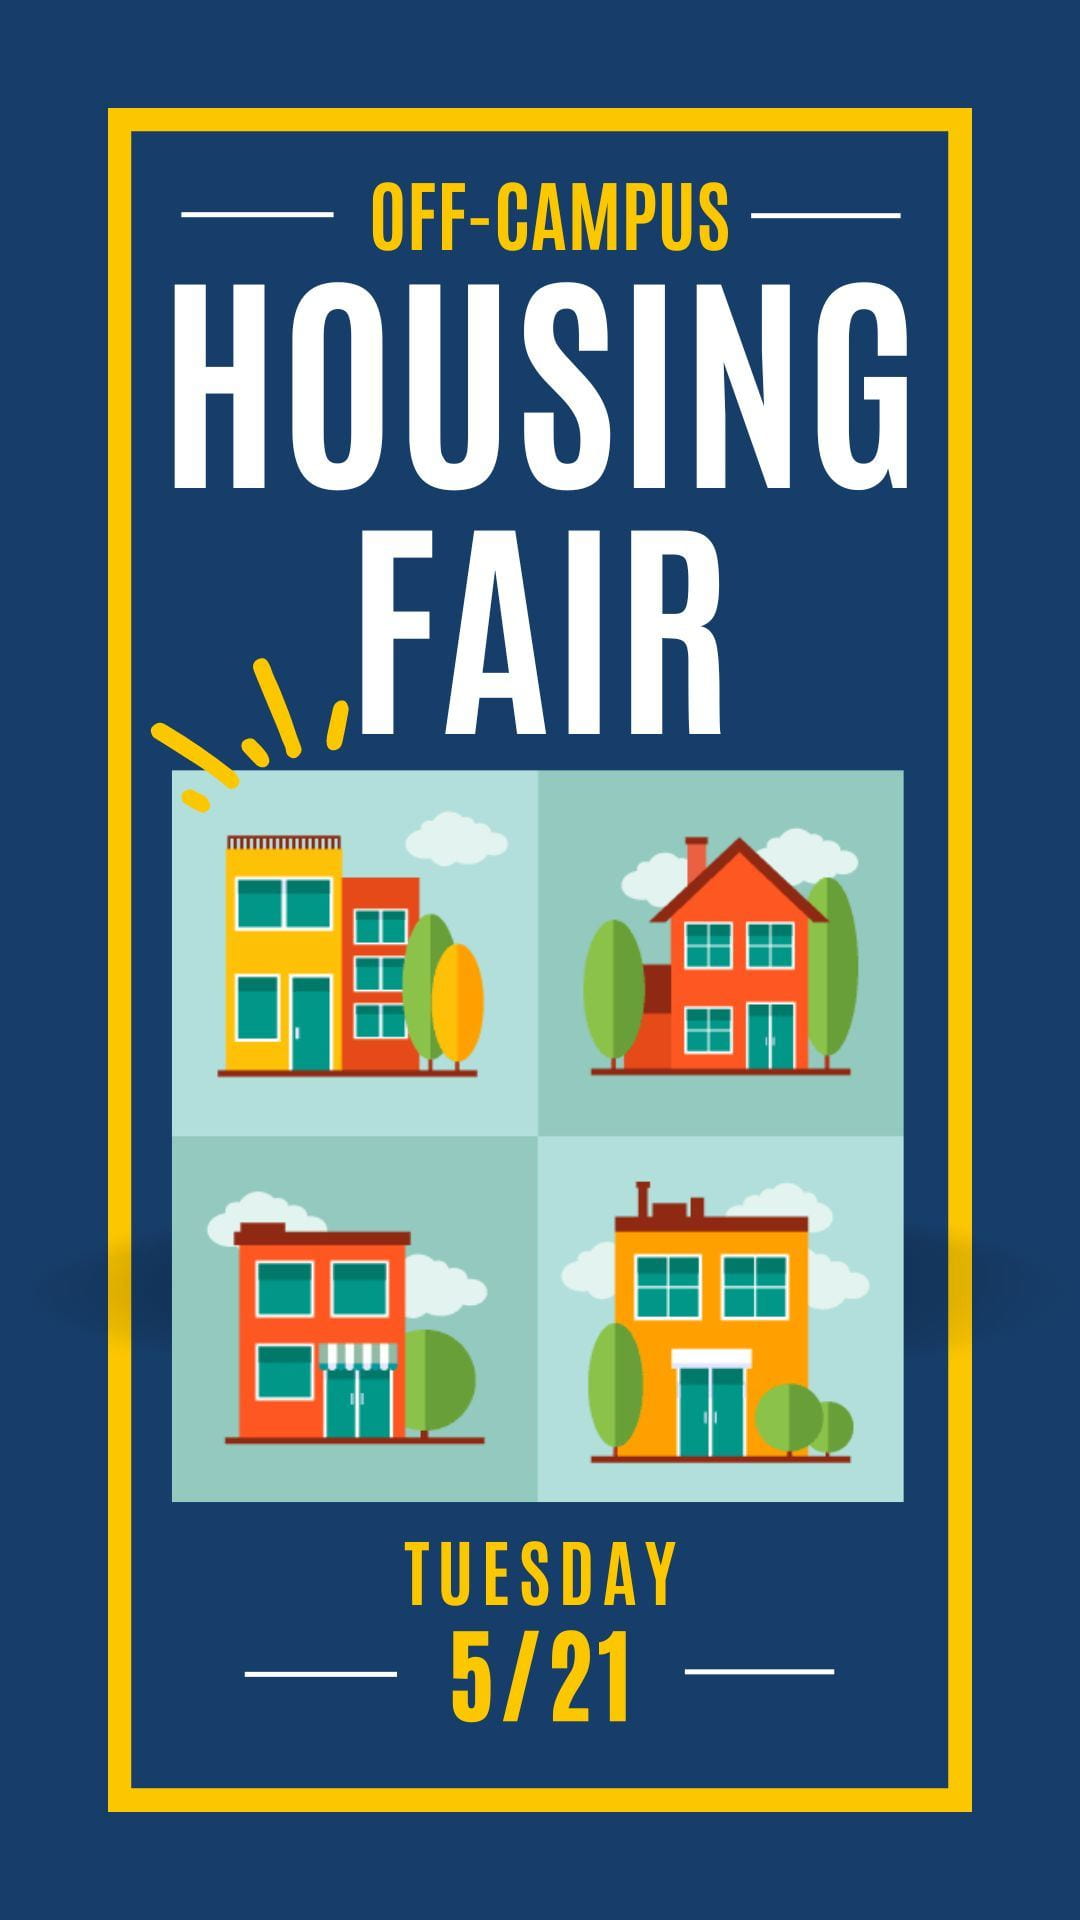 A flyer for the Off-Campus Housing Fair on Tuesday, May 21.